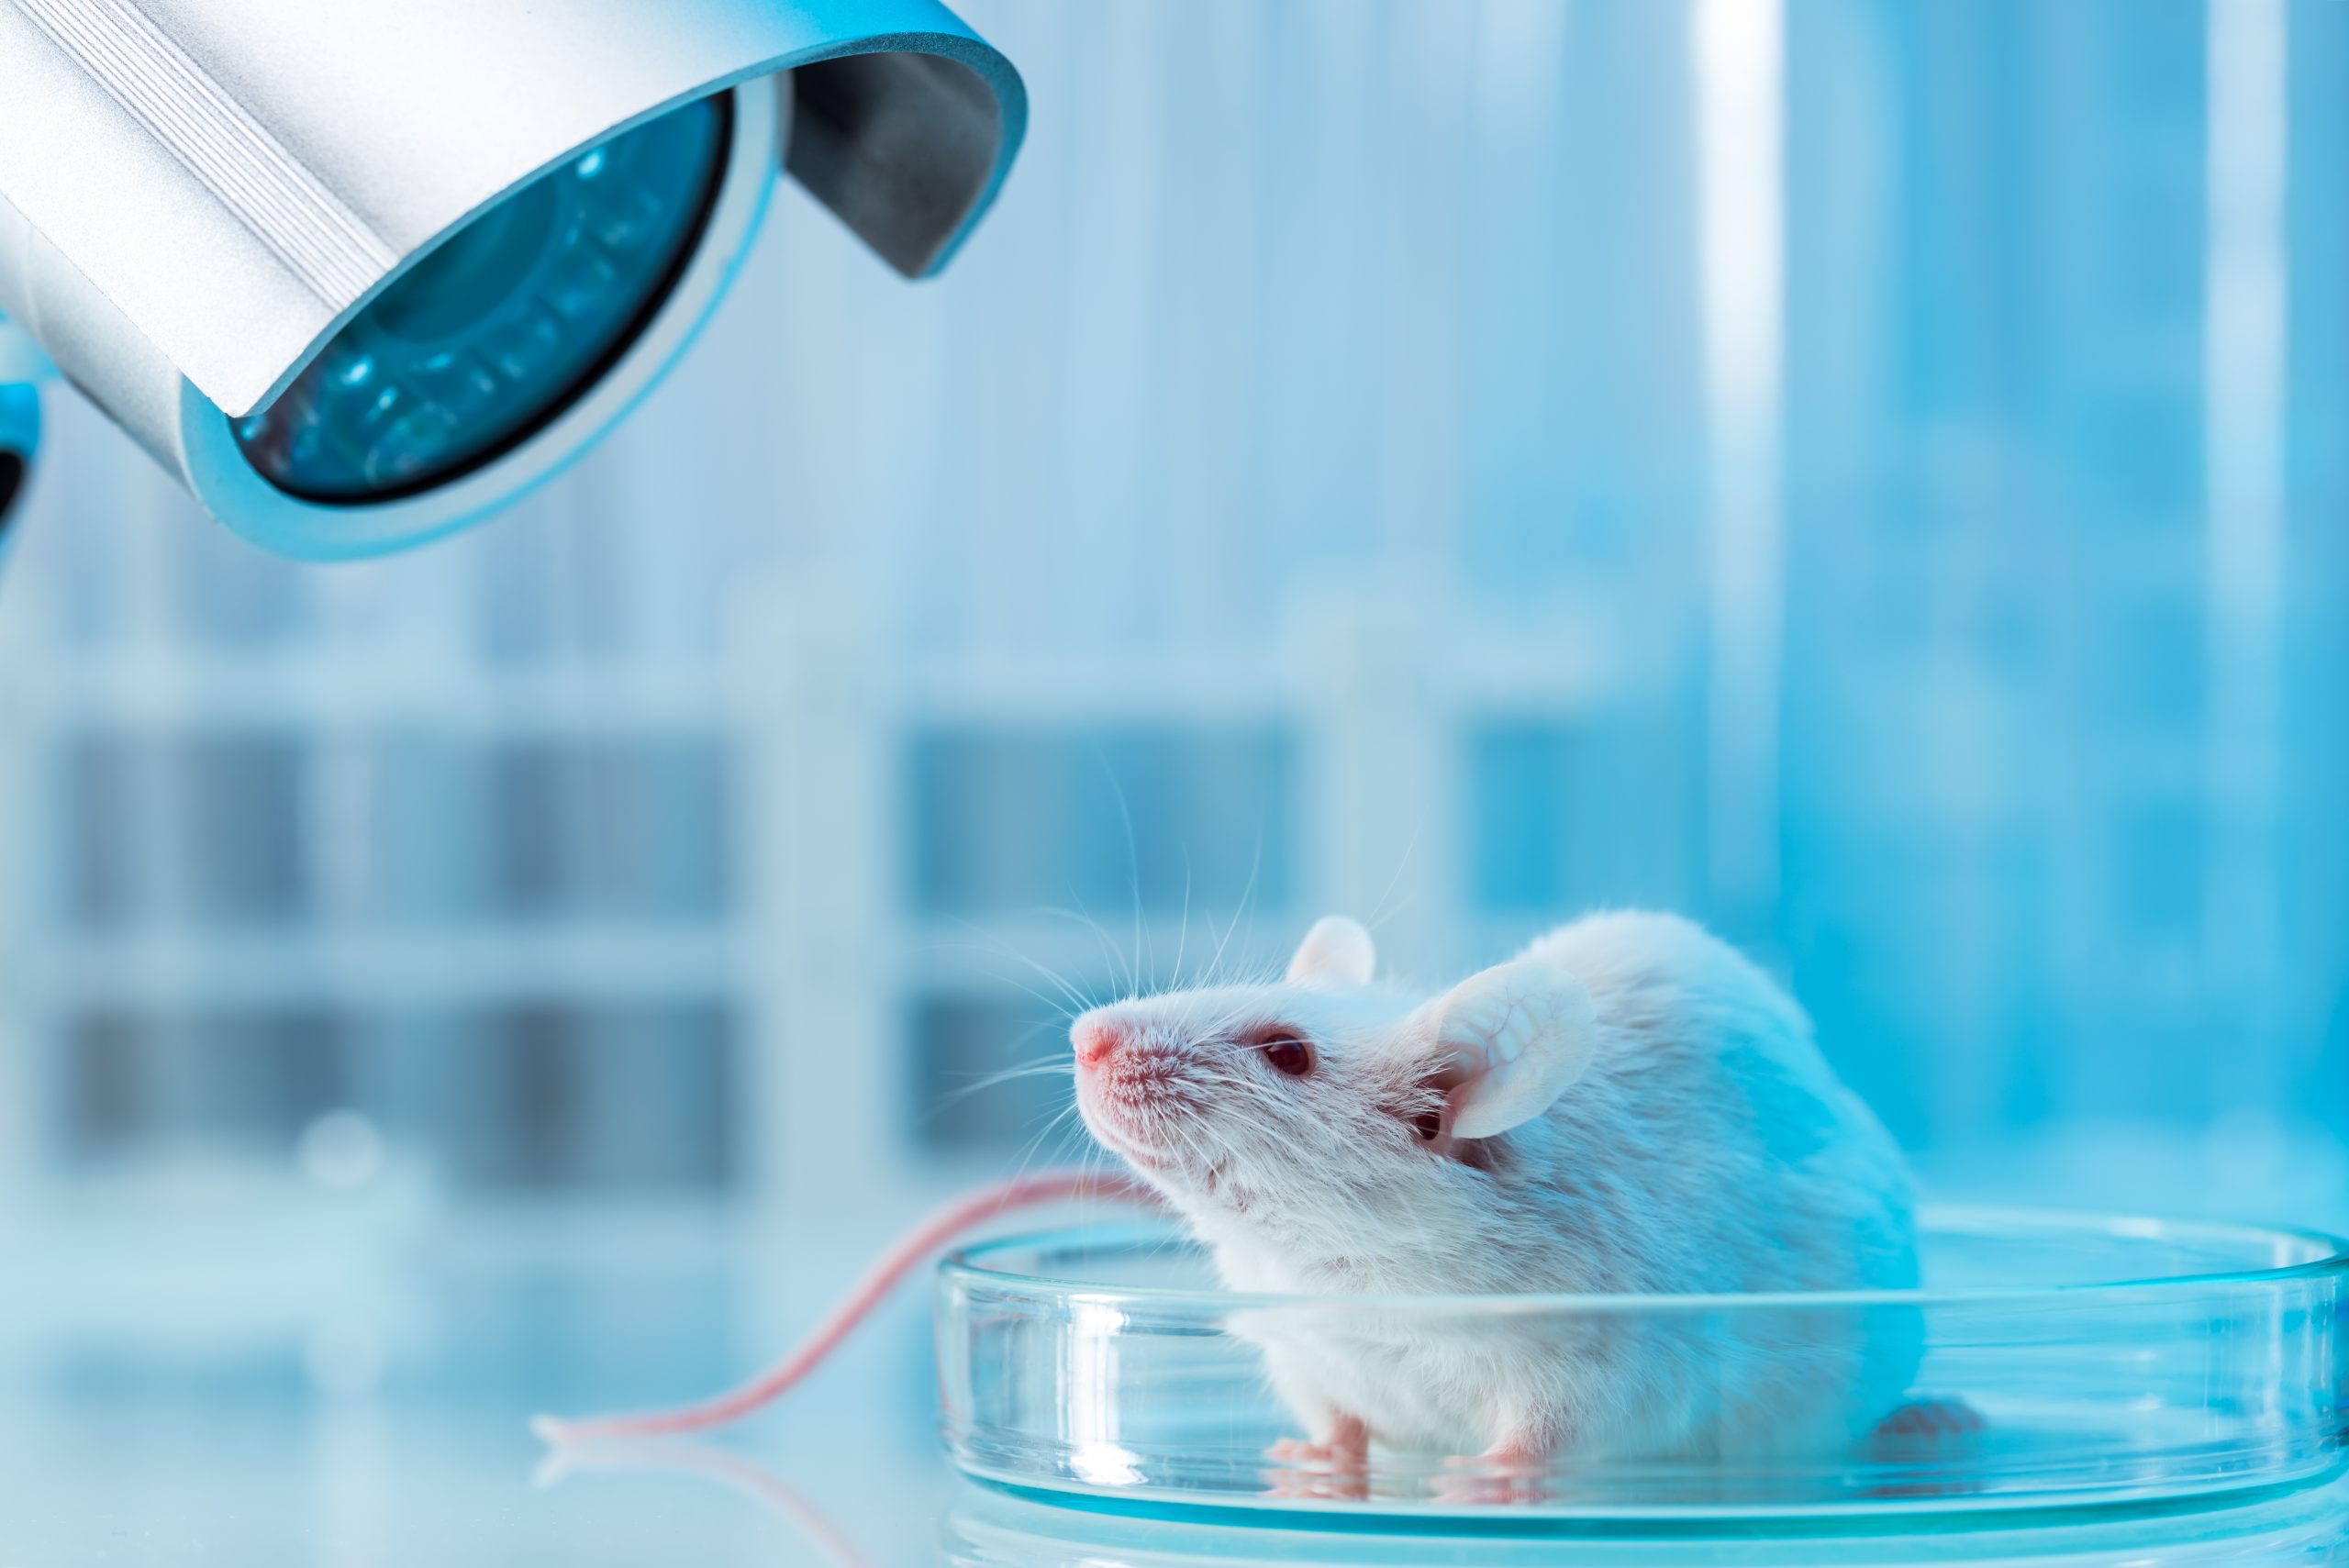 How Well Do Mouse Models Mimic Human Disease?